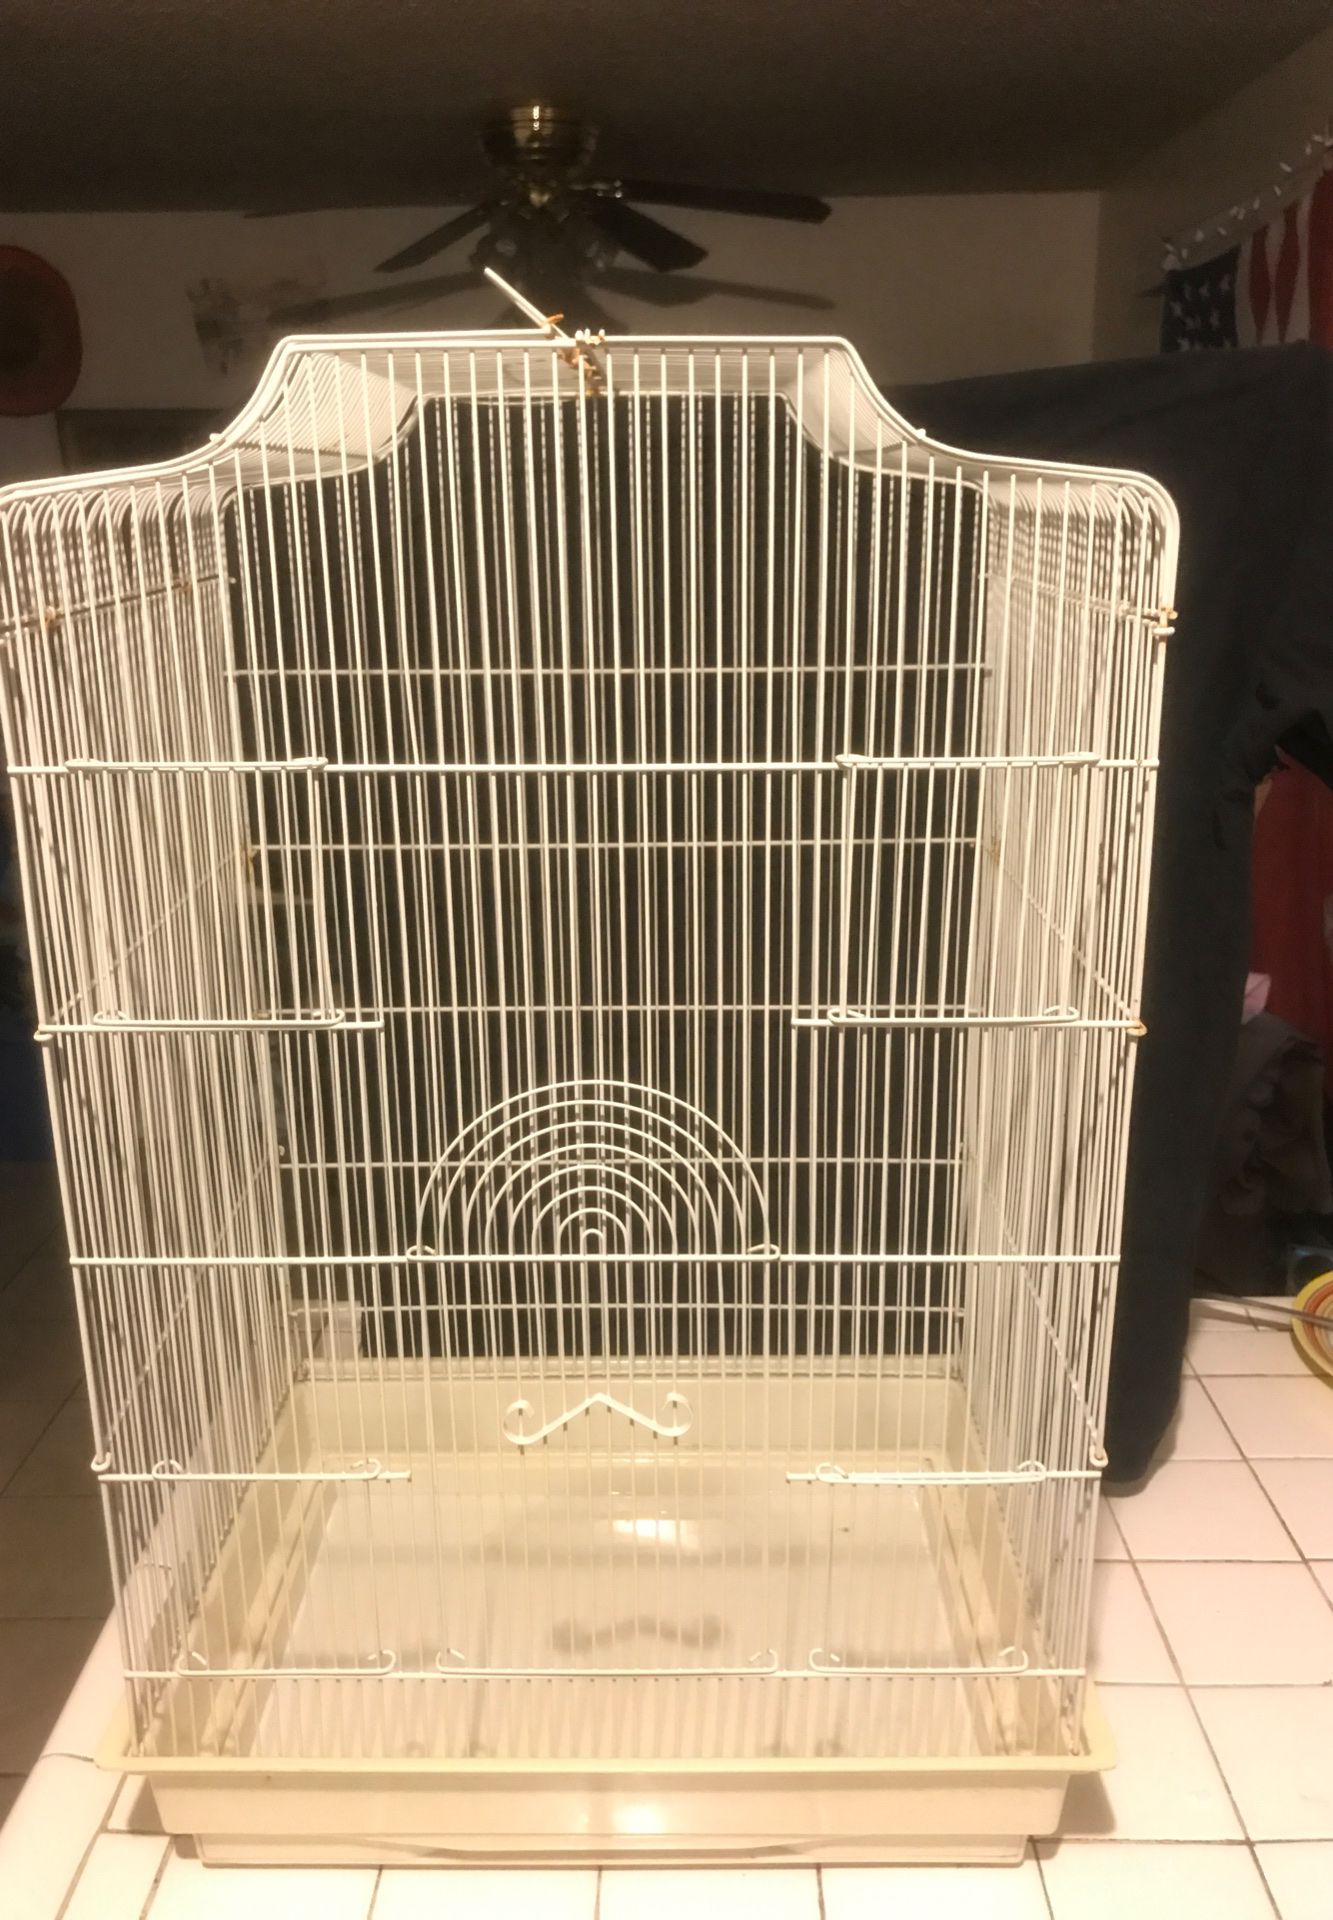 Large white bird cage for sale.